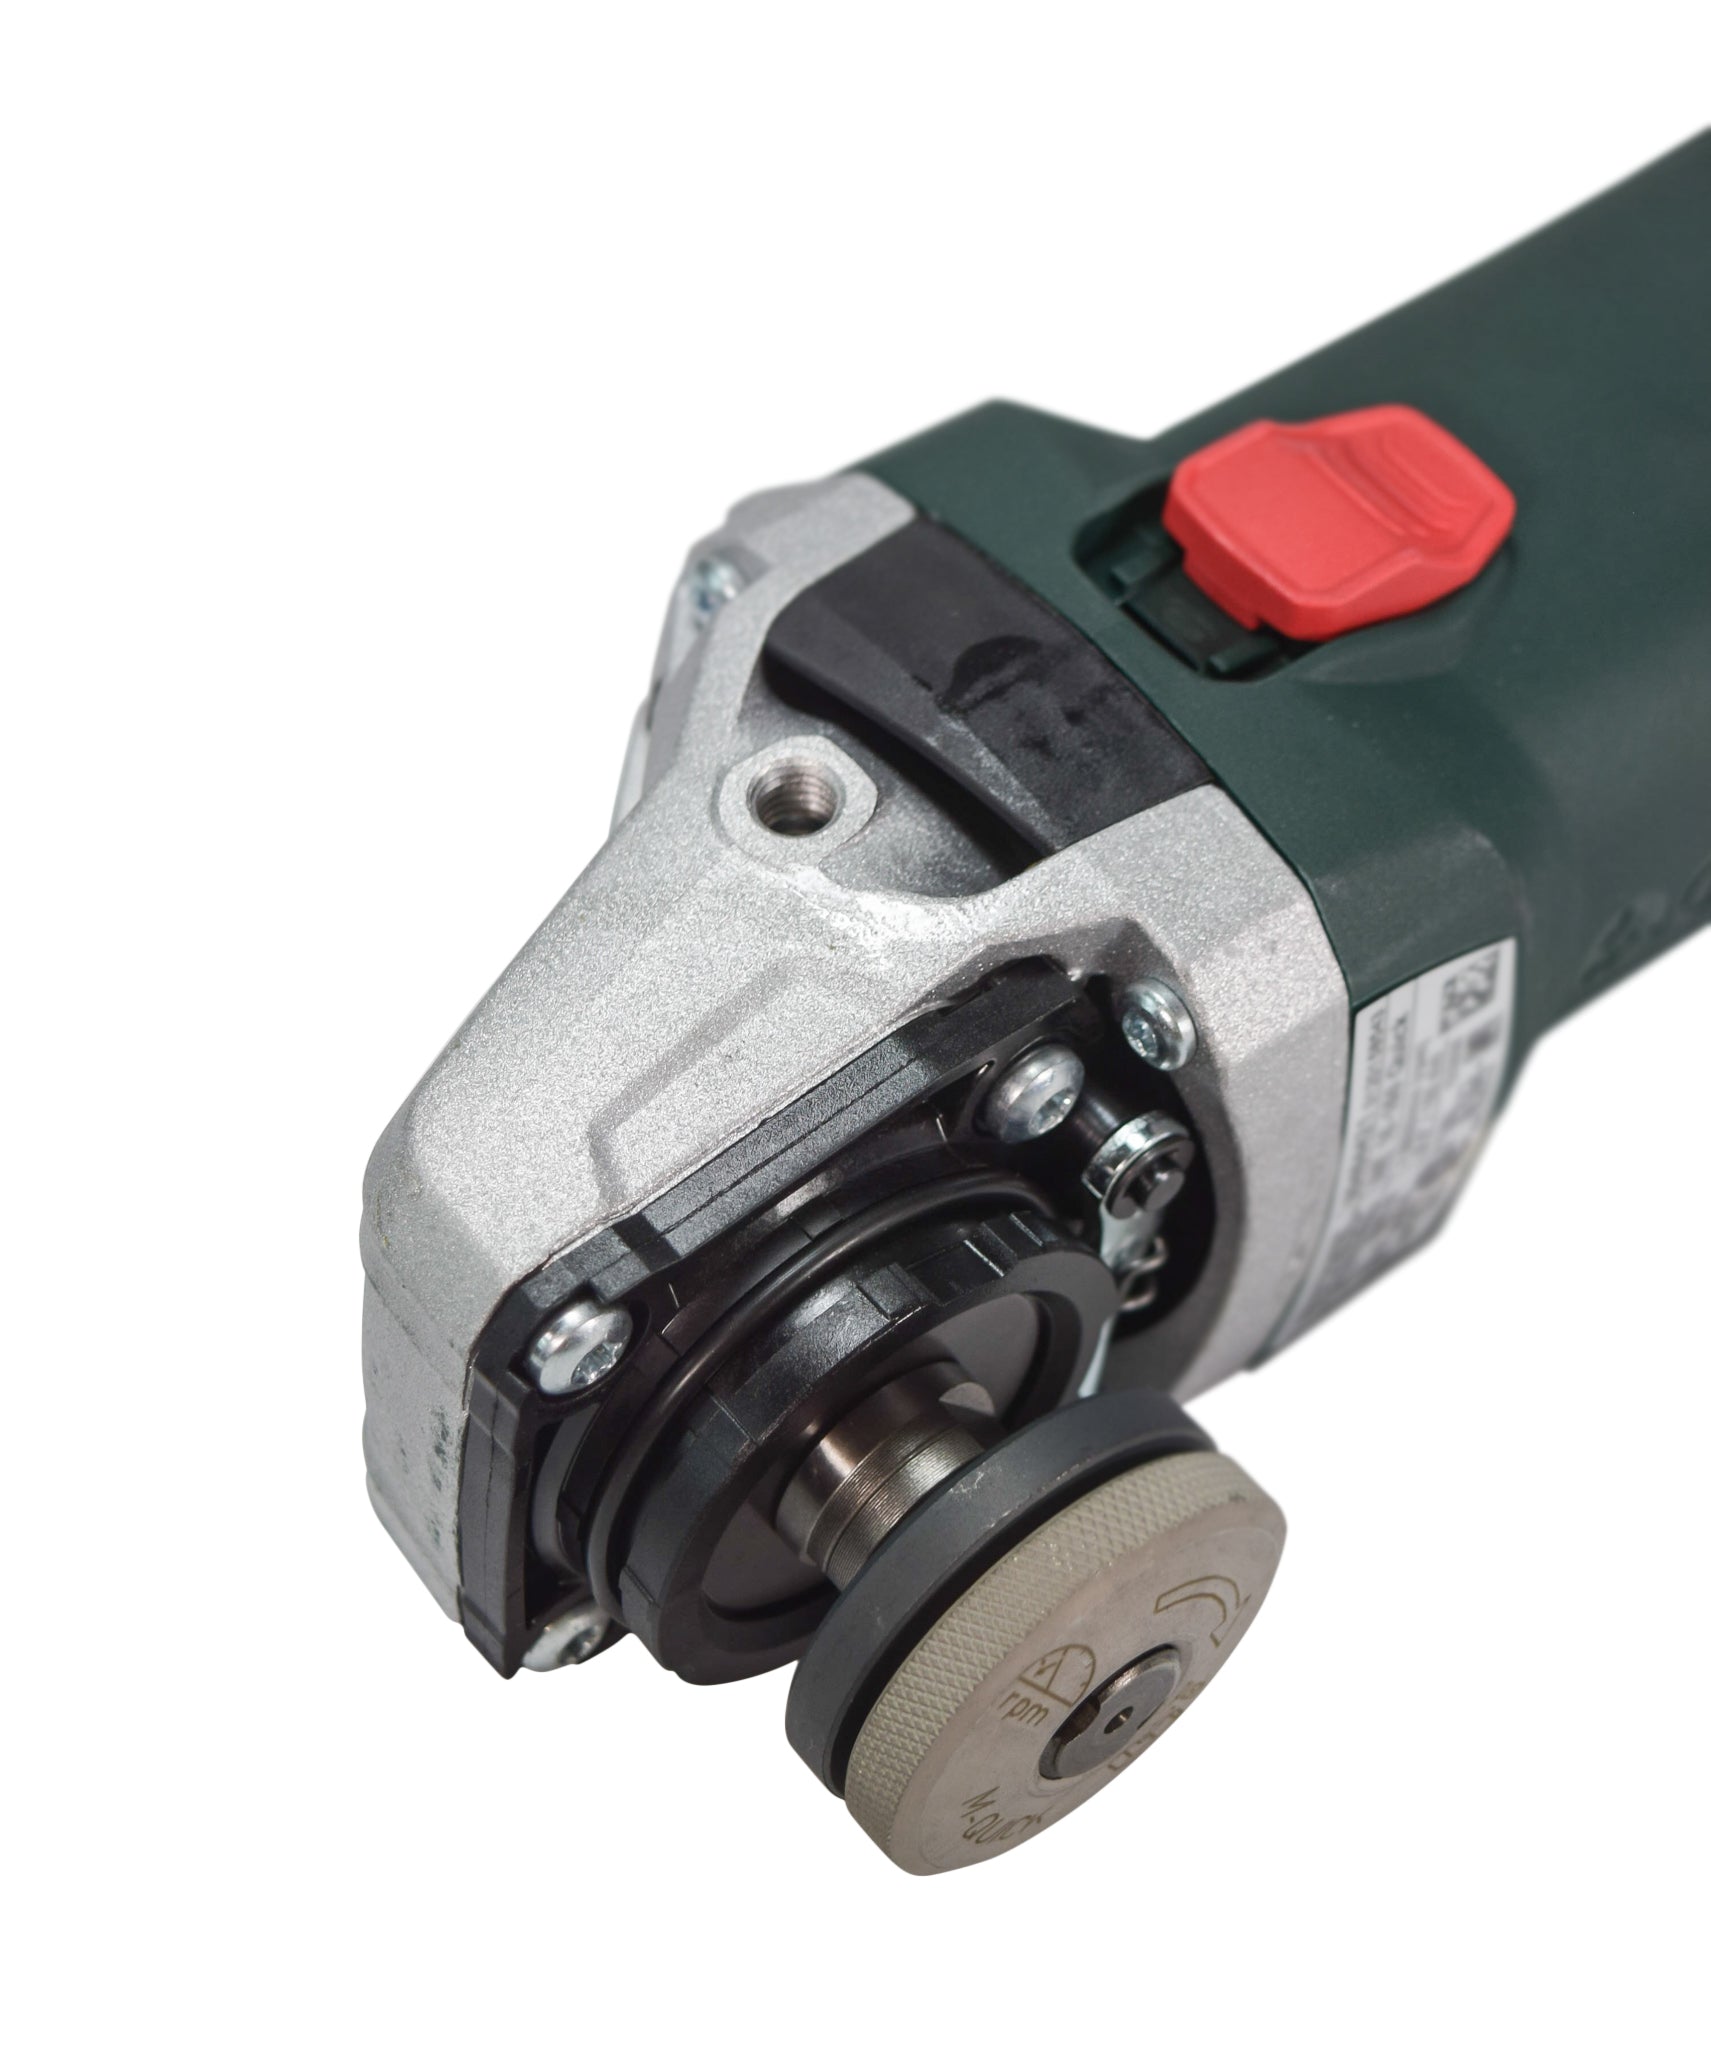 Metabo 600464420 WE 15-150 Quick 6" Corded Angle Grinder 9,600 RPM 13.5 AMP